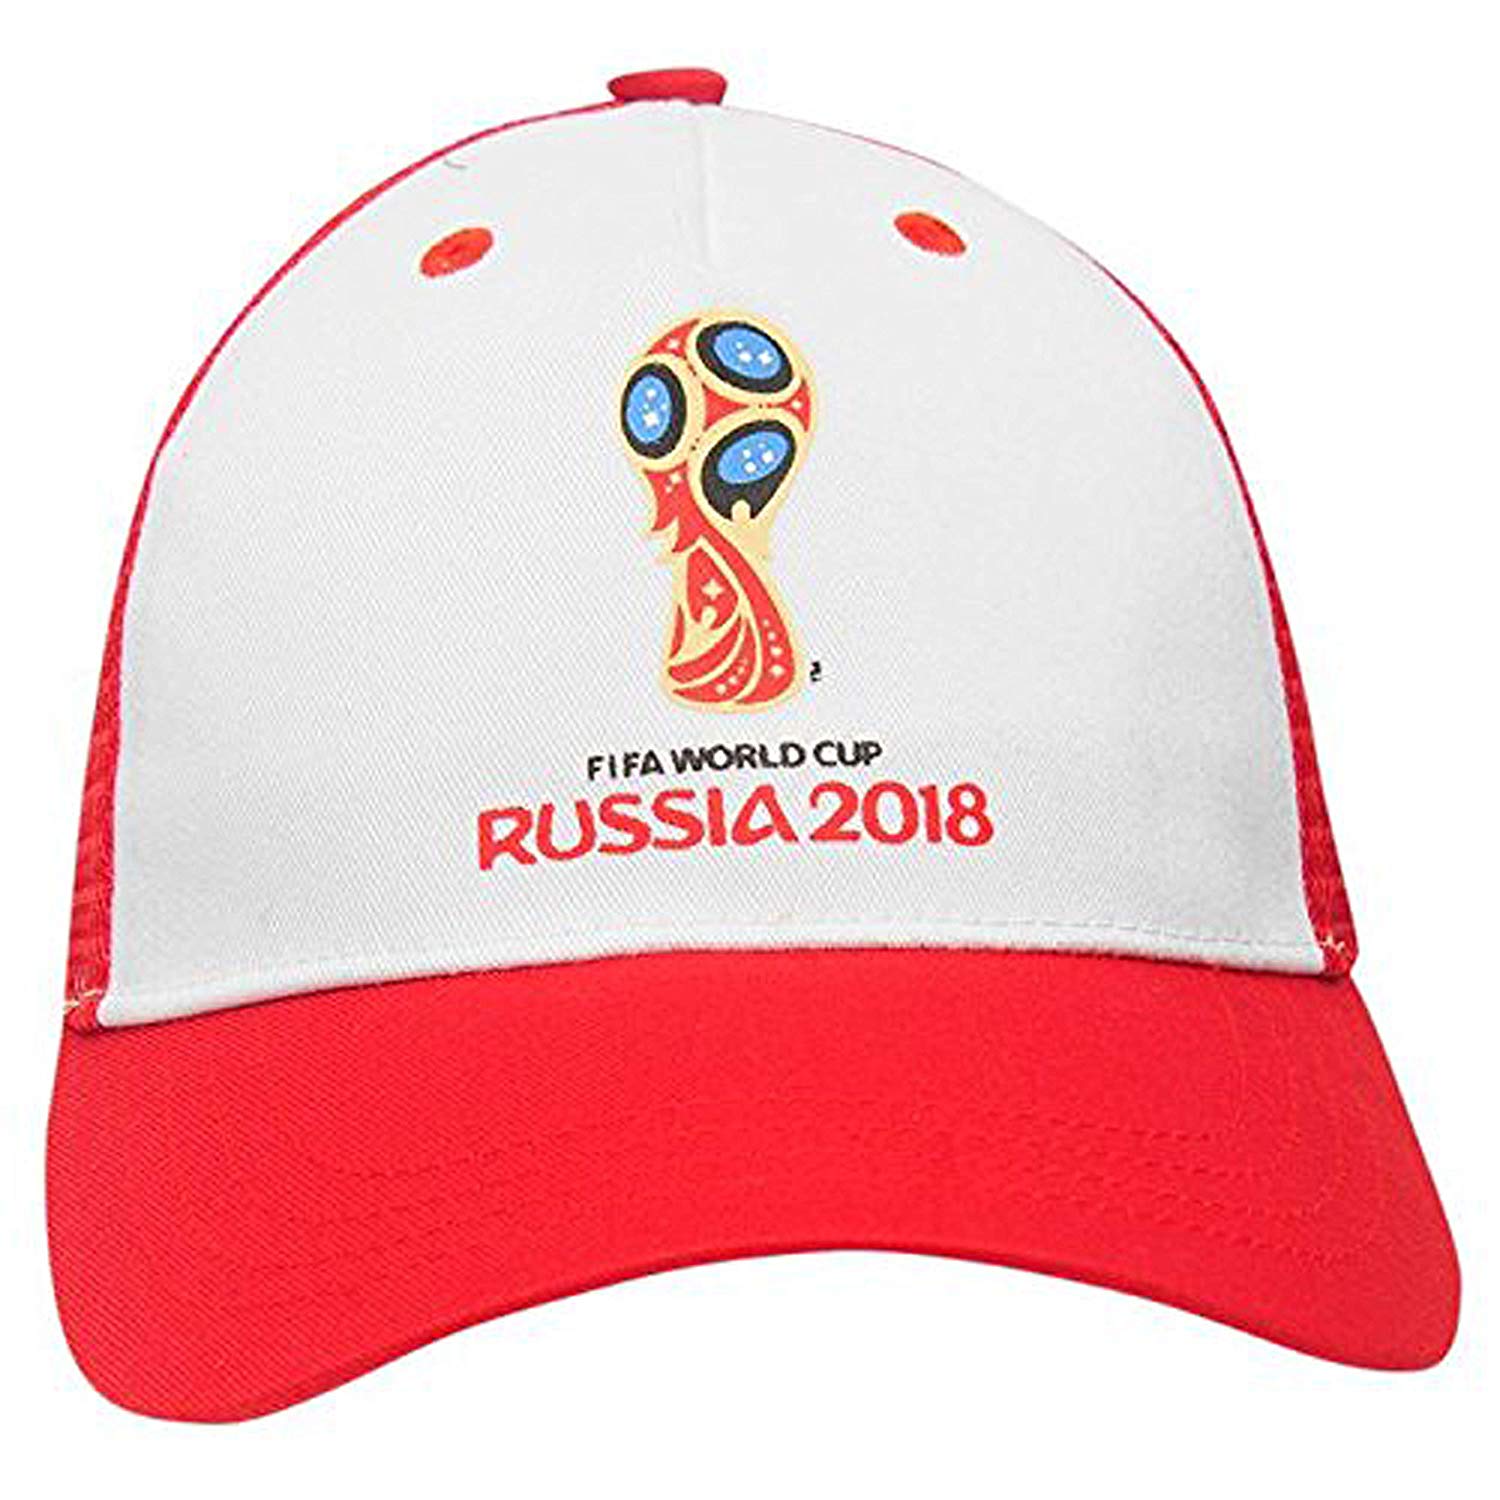 Red White a Logo - Men's Cap Hat FIFA World Cup Russia 2018 Red With Logo Size